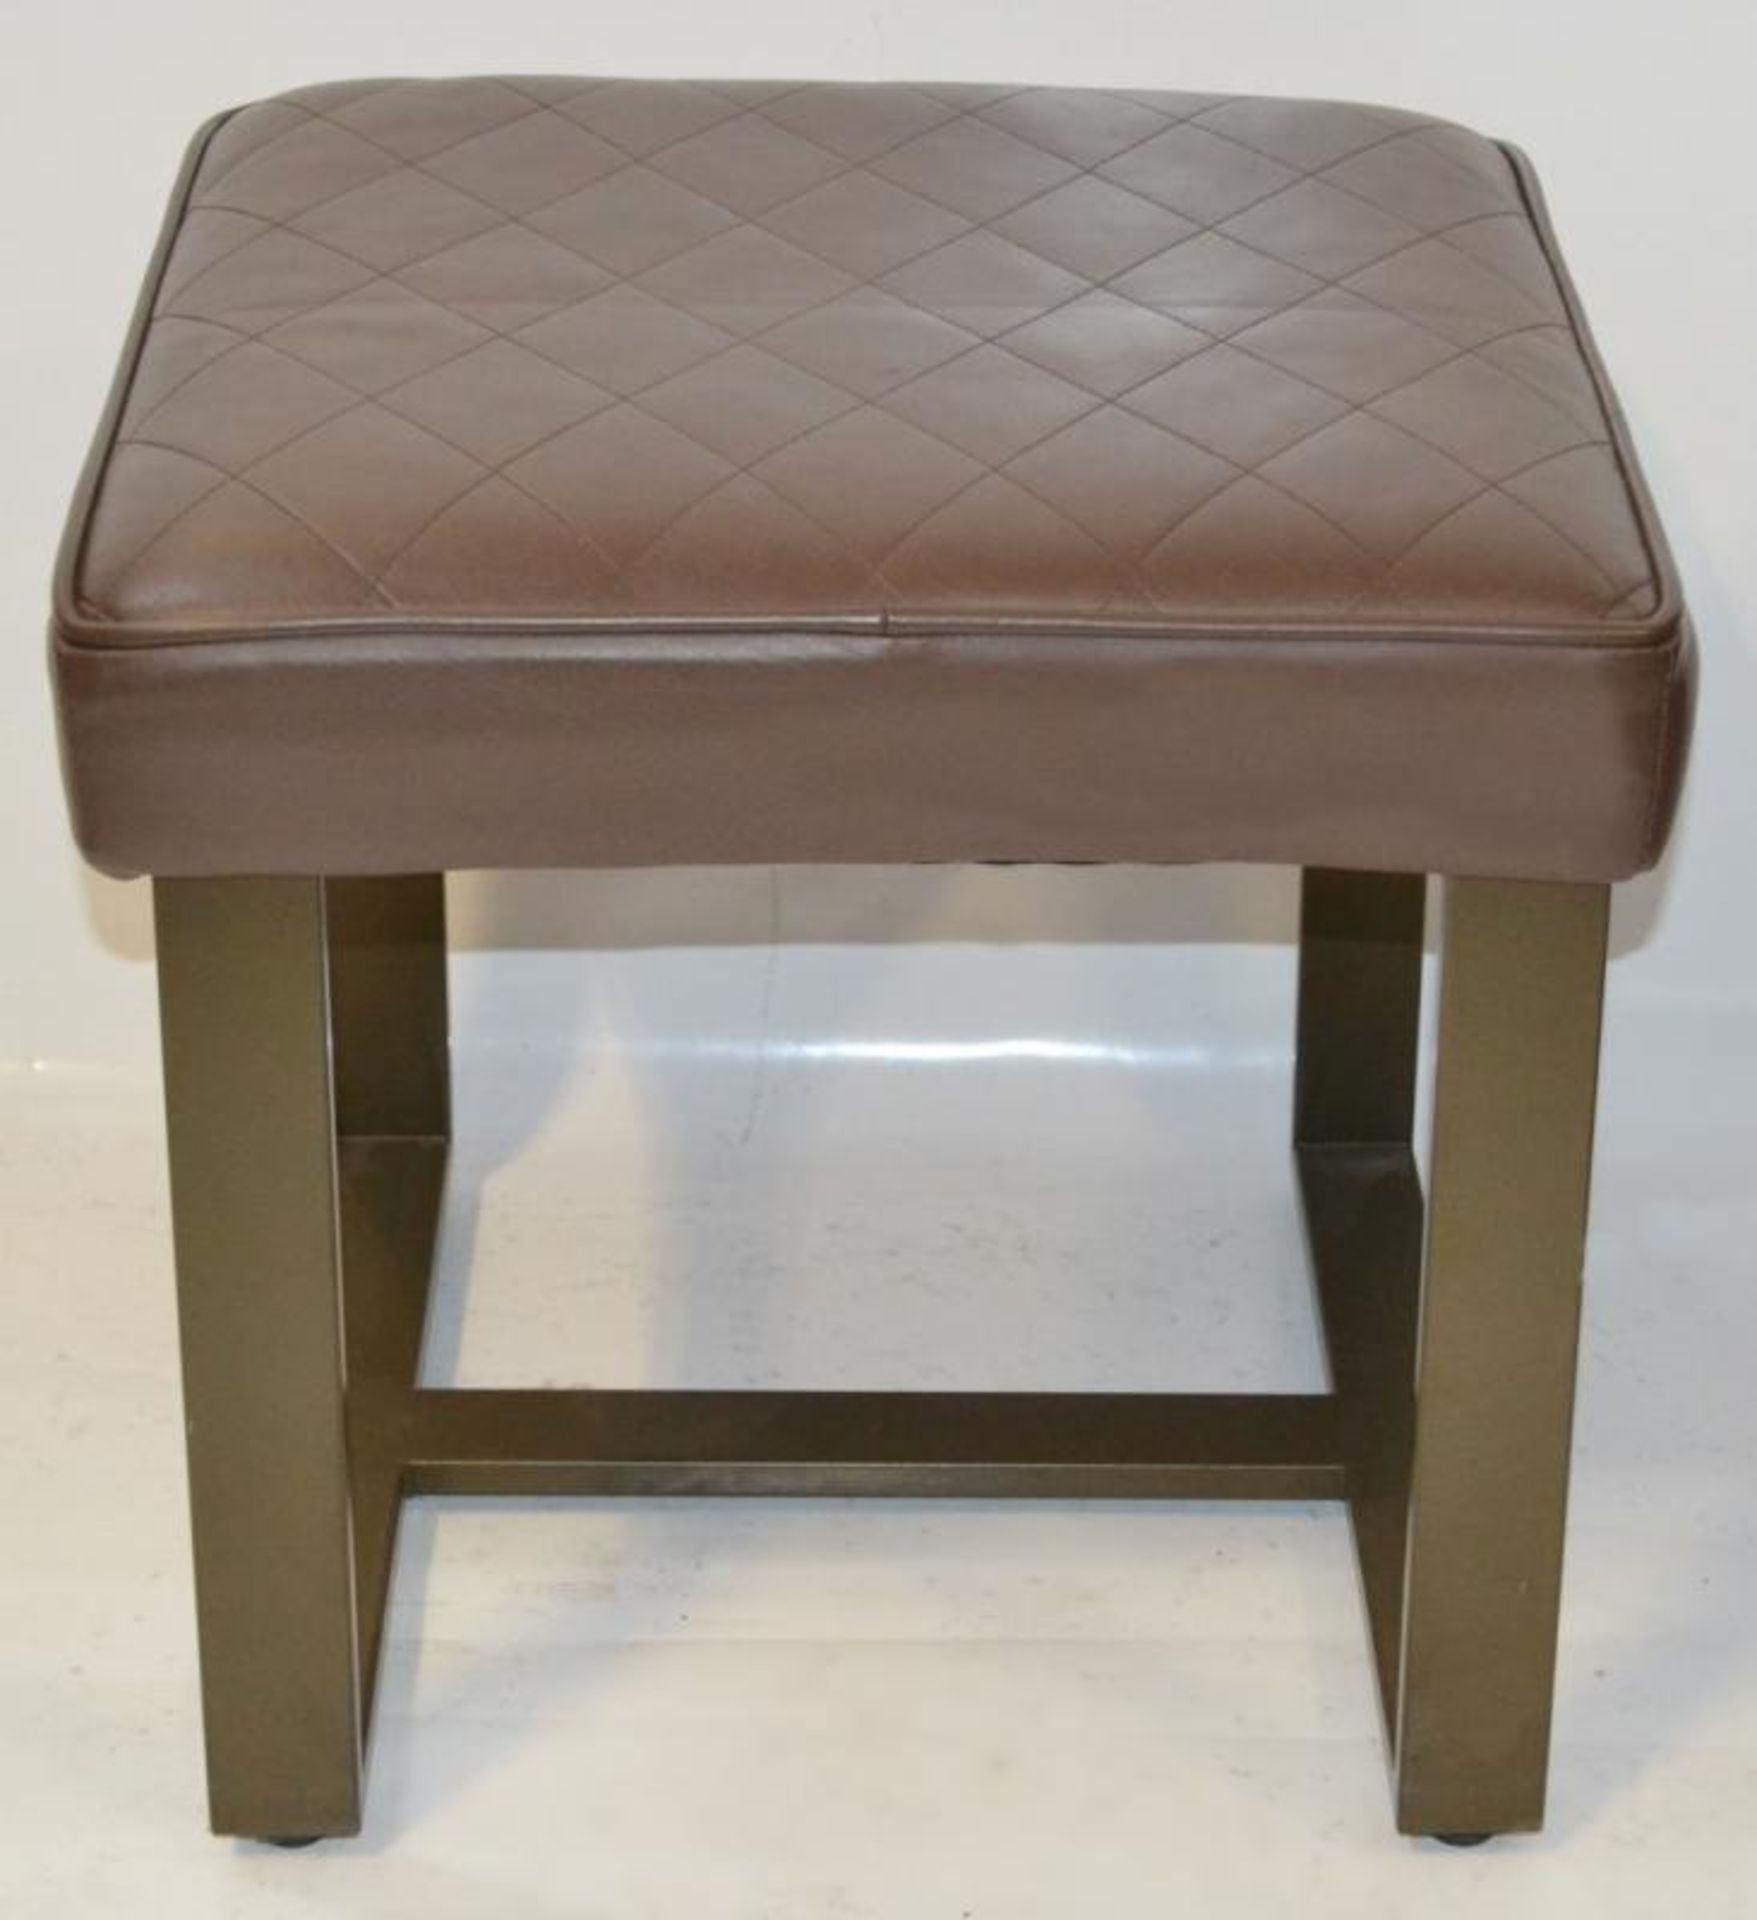 Pair Of Upholstered Stools In A Brown Faux Leather - Recently Removed From A Major UK Store In Very - Image 2 of 5